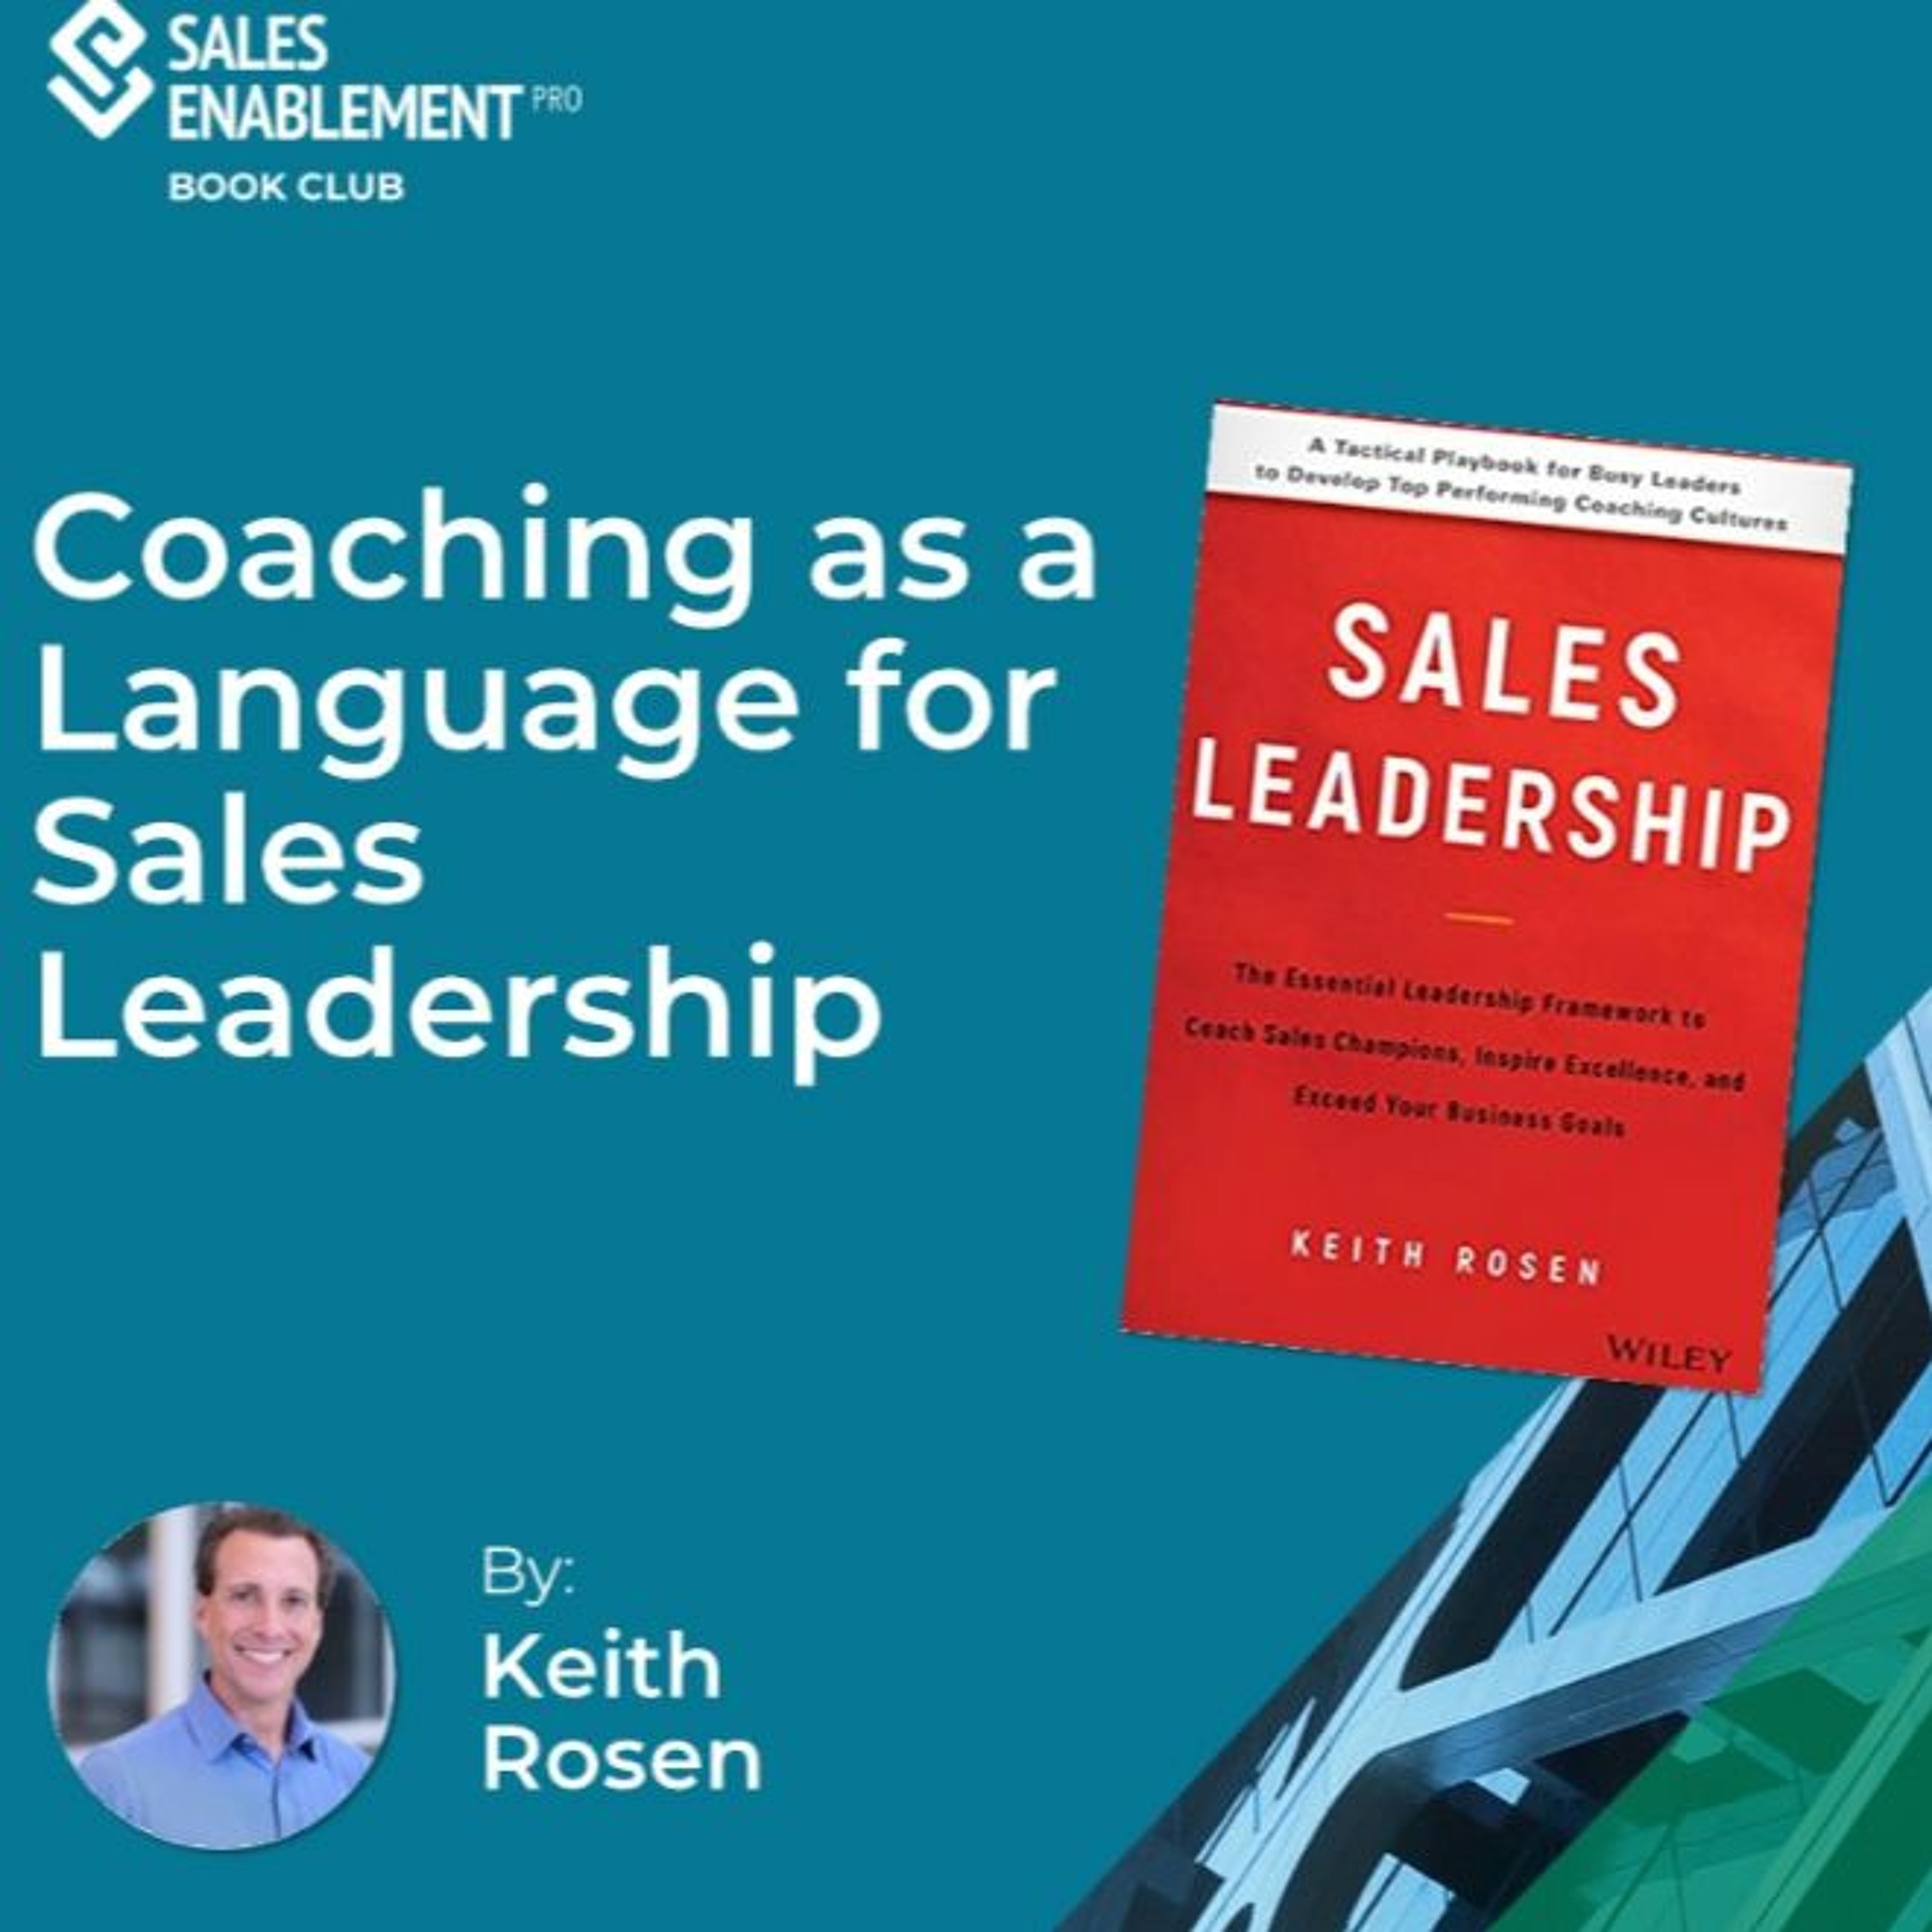 Sales Enablement Book Club  Interview - How to Use the Language of Coaching to Drive Sales